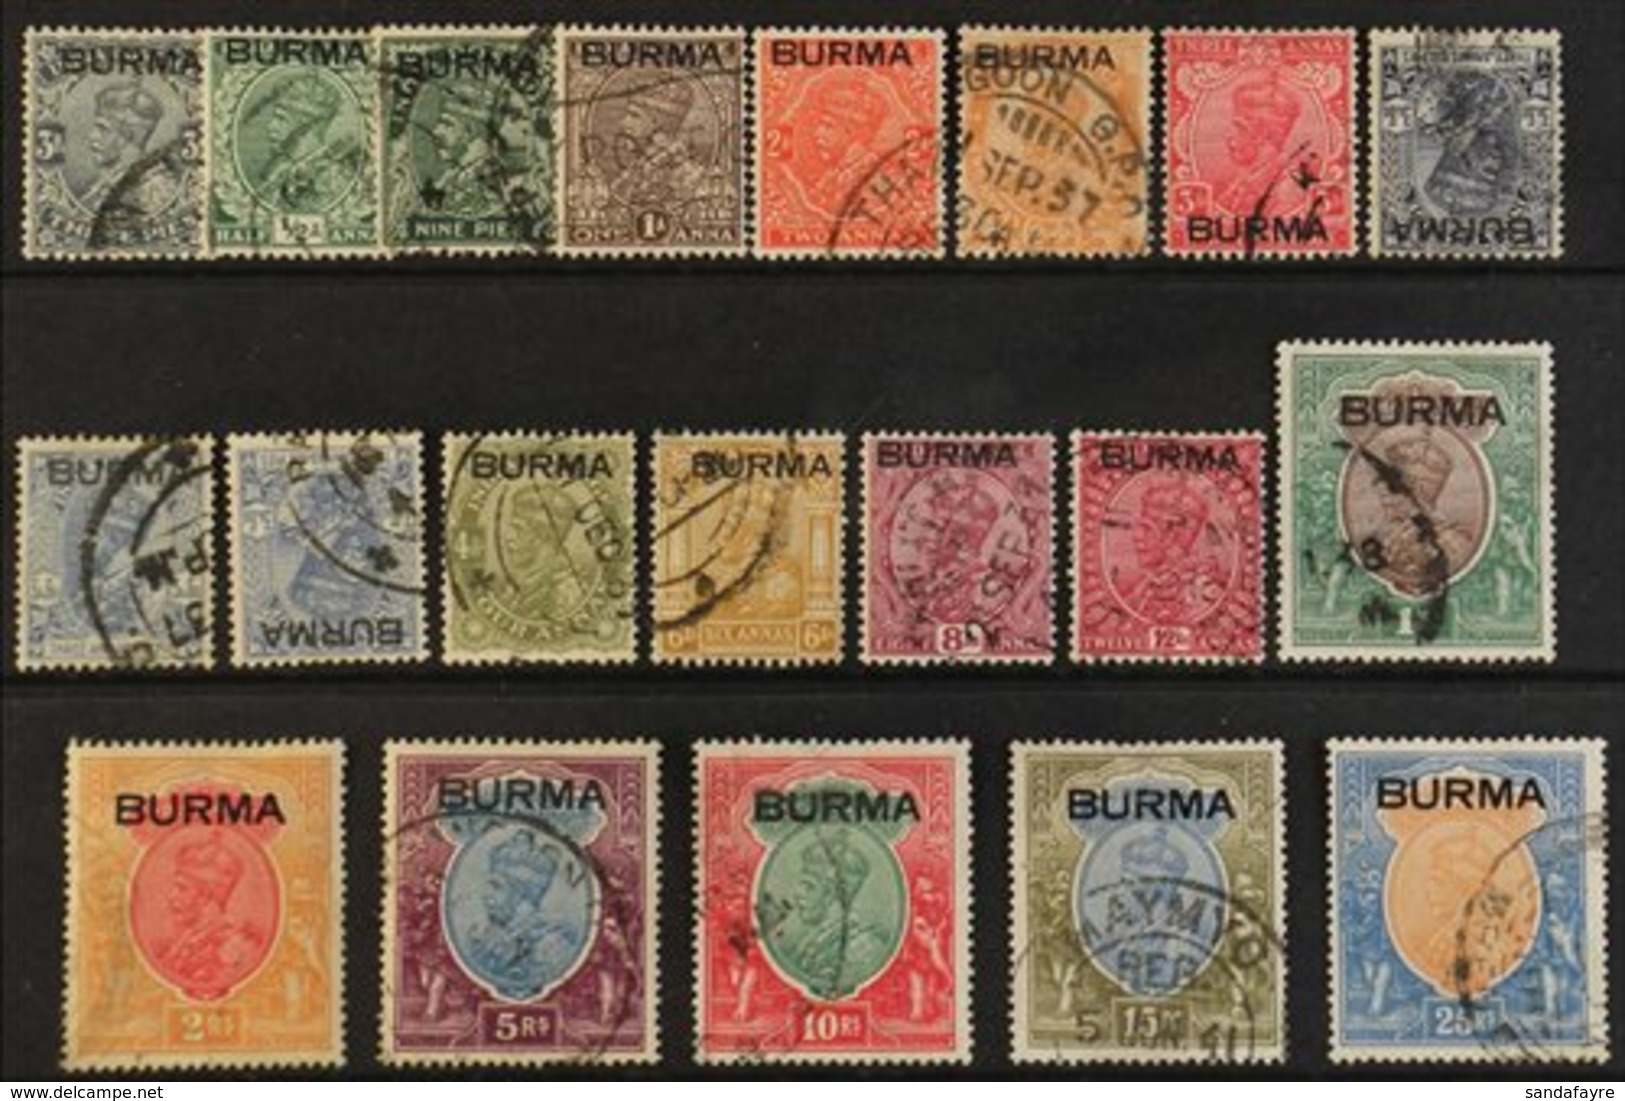 1937 KGV India Definitives Set Overprinted "BURMA" With Additional 3a6p Dull Blue, Both Wmk Upright & Inverted, SG 1/18, - Birmania (...-1947)